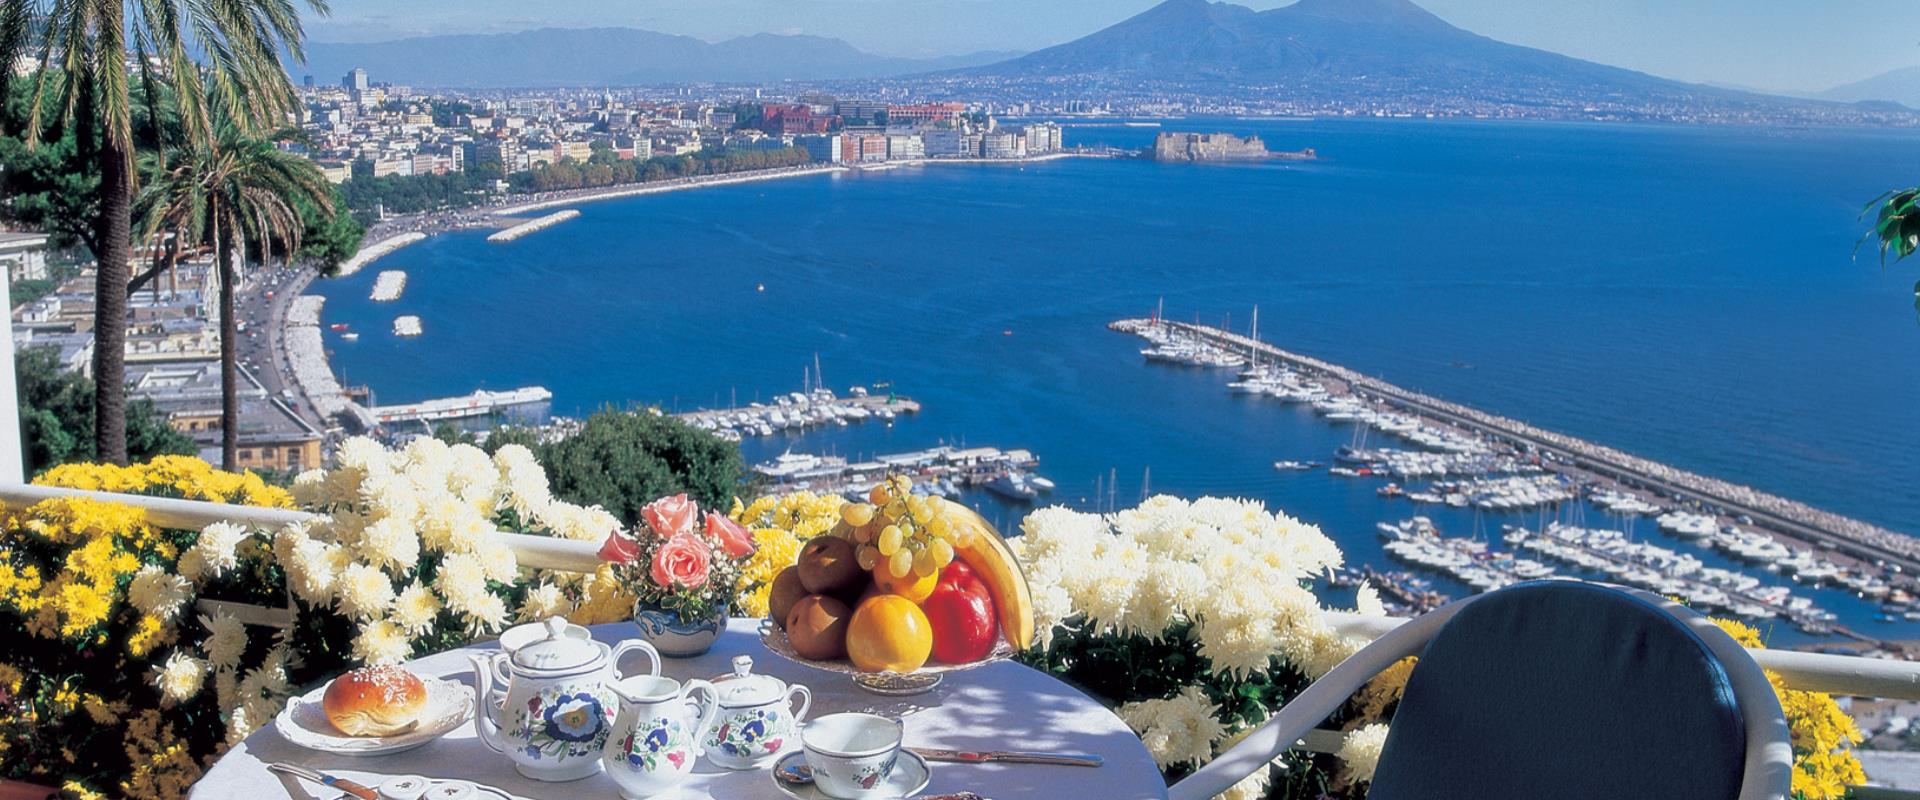 Breakfast overlooking the Gulf of Naples fromBW Signature Collection Hotel Paradiso